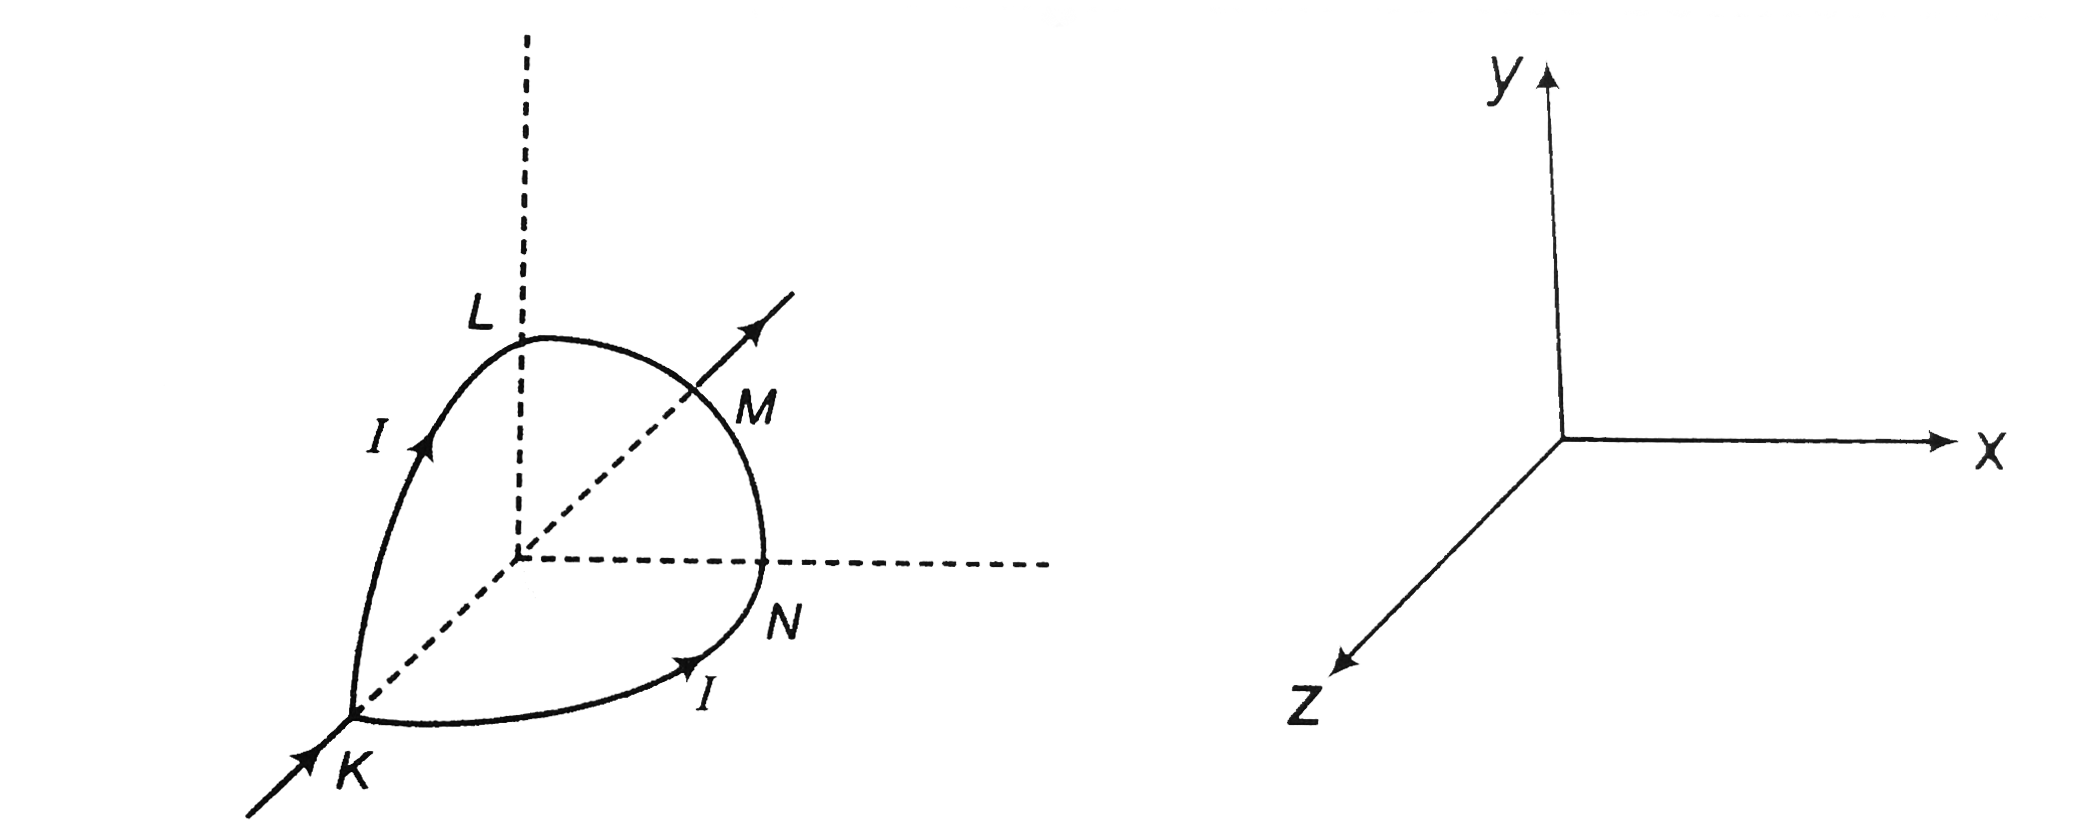 A circular loop of radius R is bent along a diameter and given a shape as shown in figure. One of the semicircles (KNM) lies in the xz-plane and the other one (KLM) in the yz-plane with their centres at the origin. Current I is flowing through each of the semicircles as shown in the figure.      (a) A particle of charge q is released at the origin with a velocity v =- v0hati. Find the instantaneous force F on the particle. Assume that space is gravity free.  (b) If an external uniform magnetic field B0hatj is applied, determine the force F1 and F2 on the semicircles KLM and KNM due to the field and the net force F on the loop.